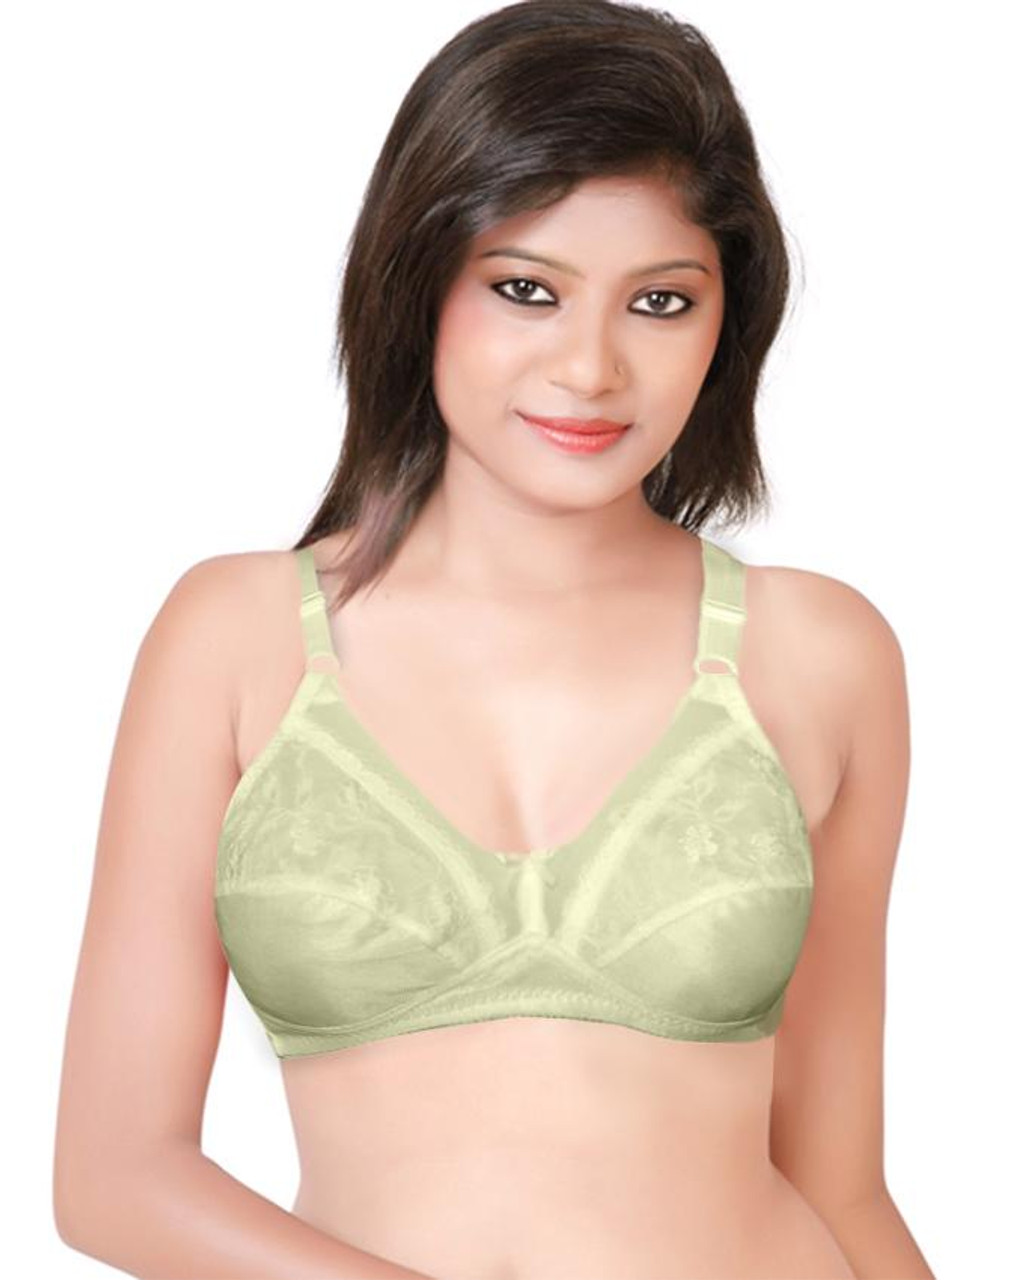 Buy Online Newy Women Wire Free Non Padded Bra-1650302038 at